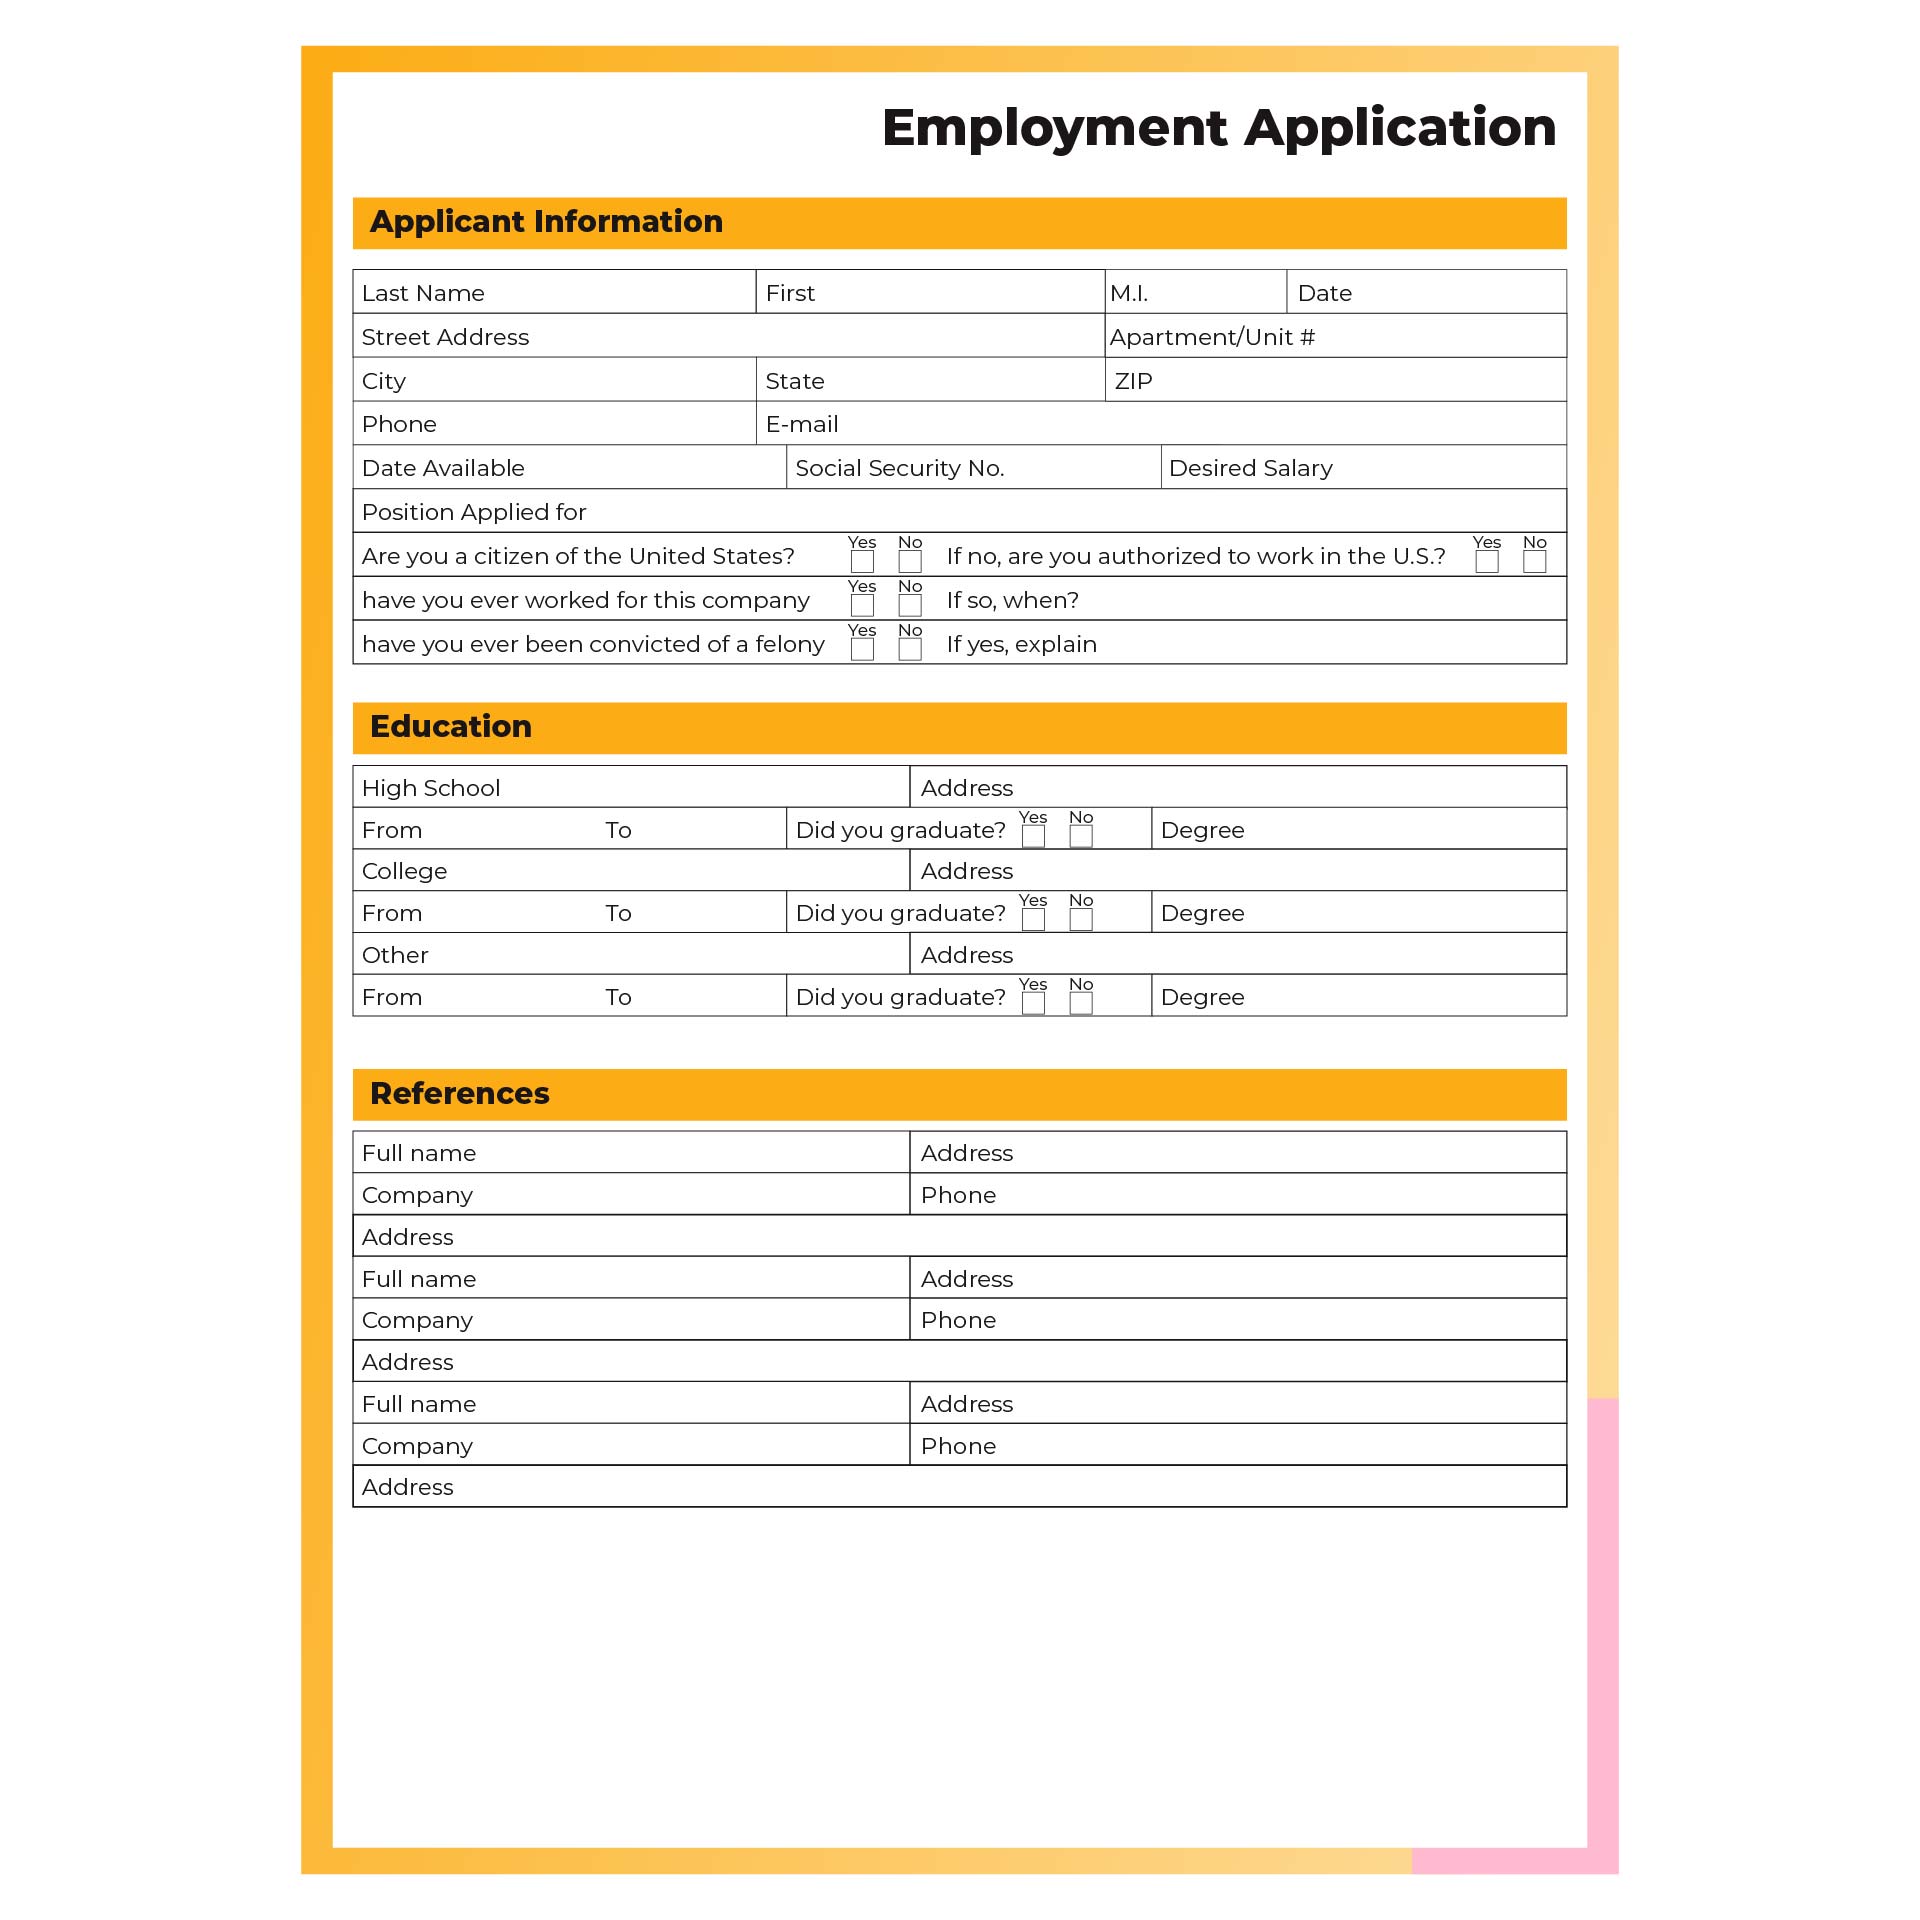 9-best-images-of-practice-job-application-forms-printable-practice